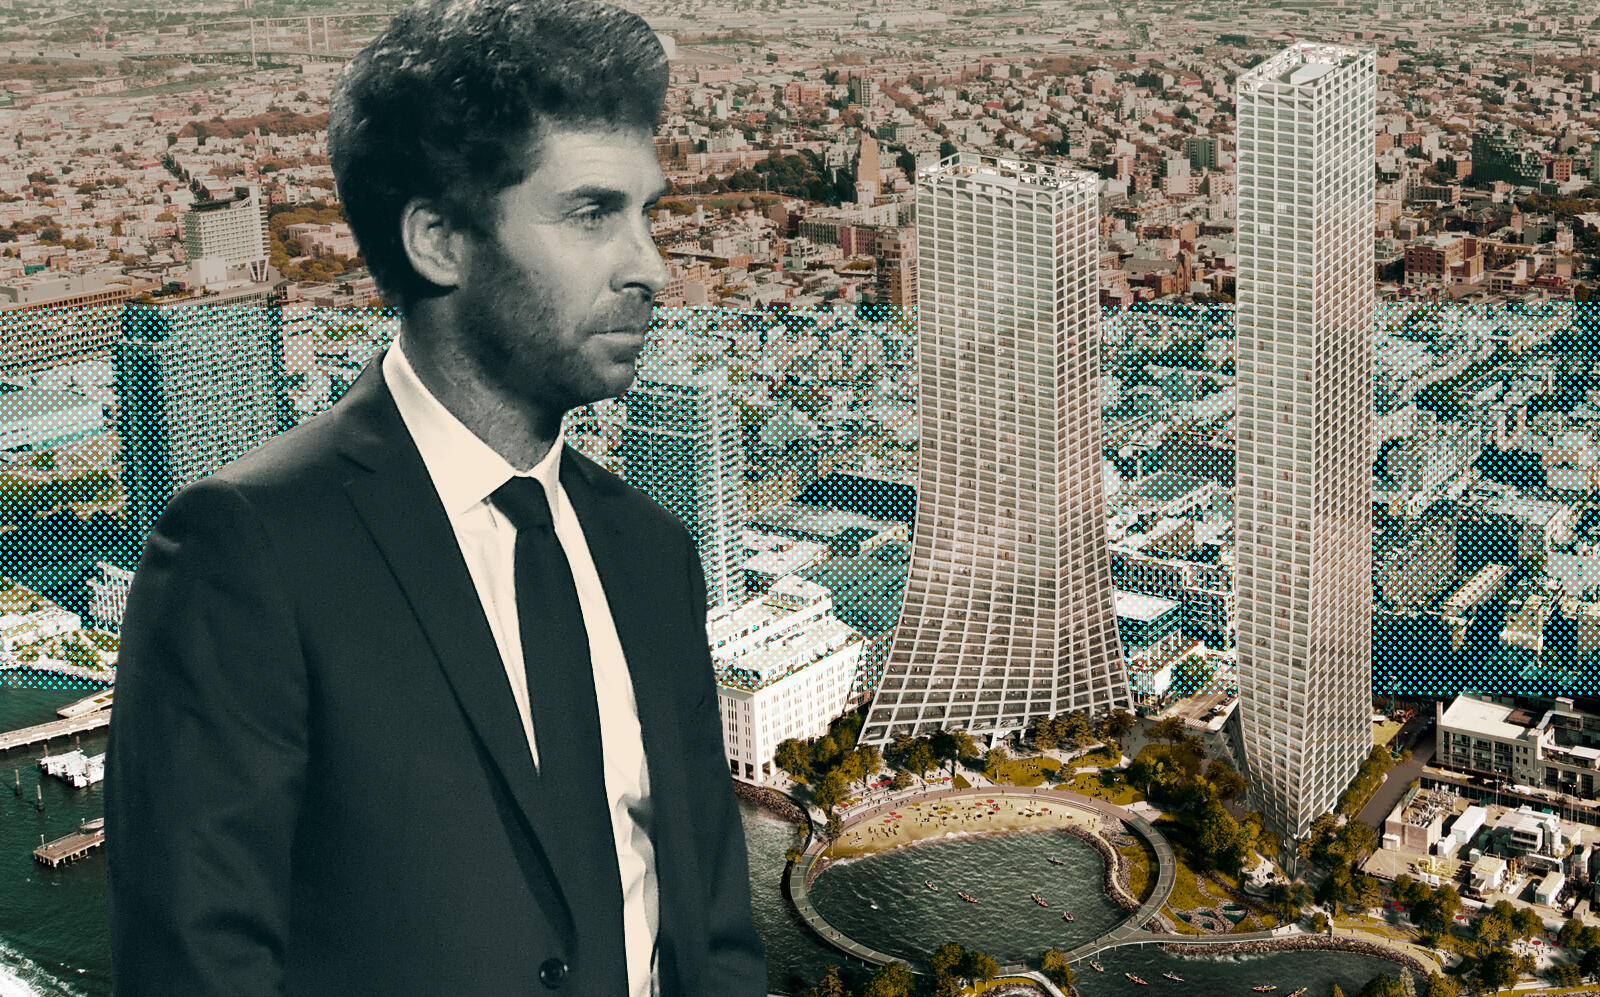 Two Trees CEO Jed Walentas and renderings of the controversial project. (Getty, James Corner Field Operations / Bjarke Ingels Group)